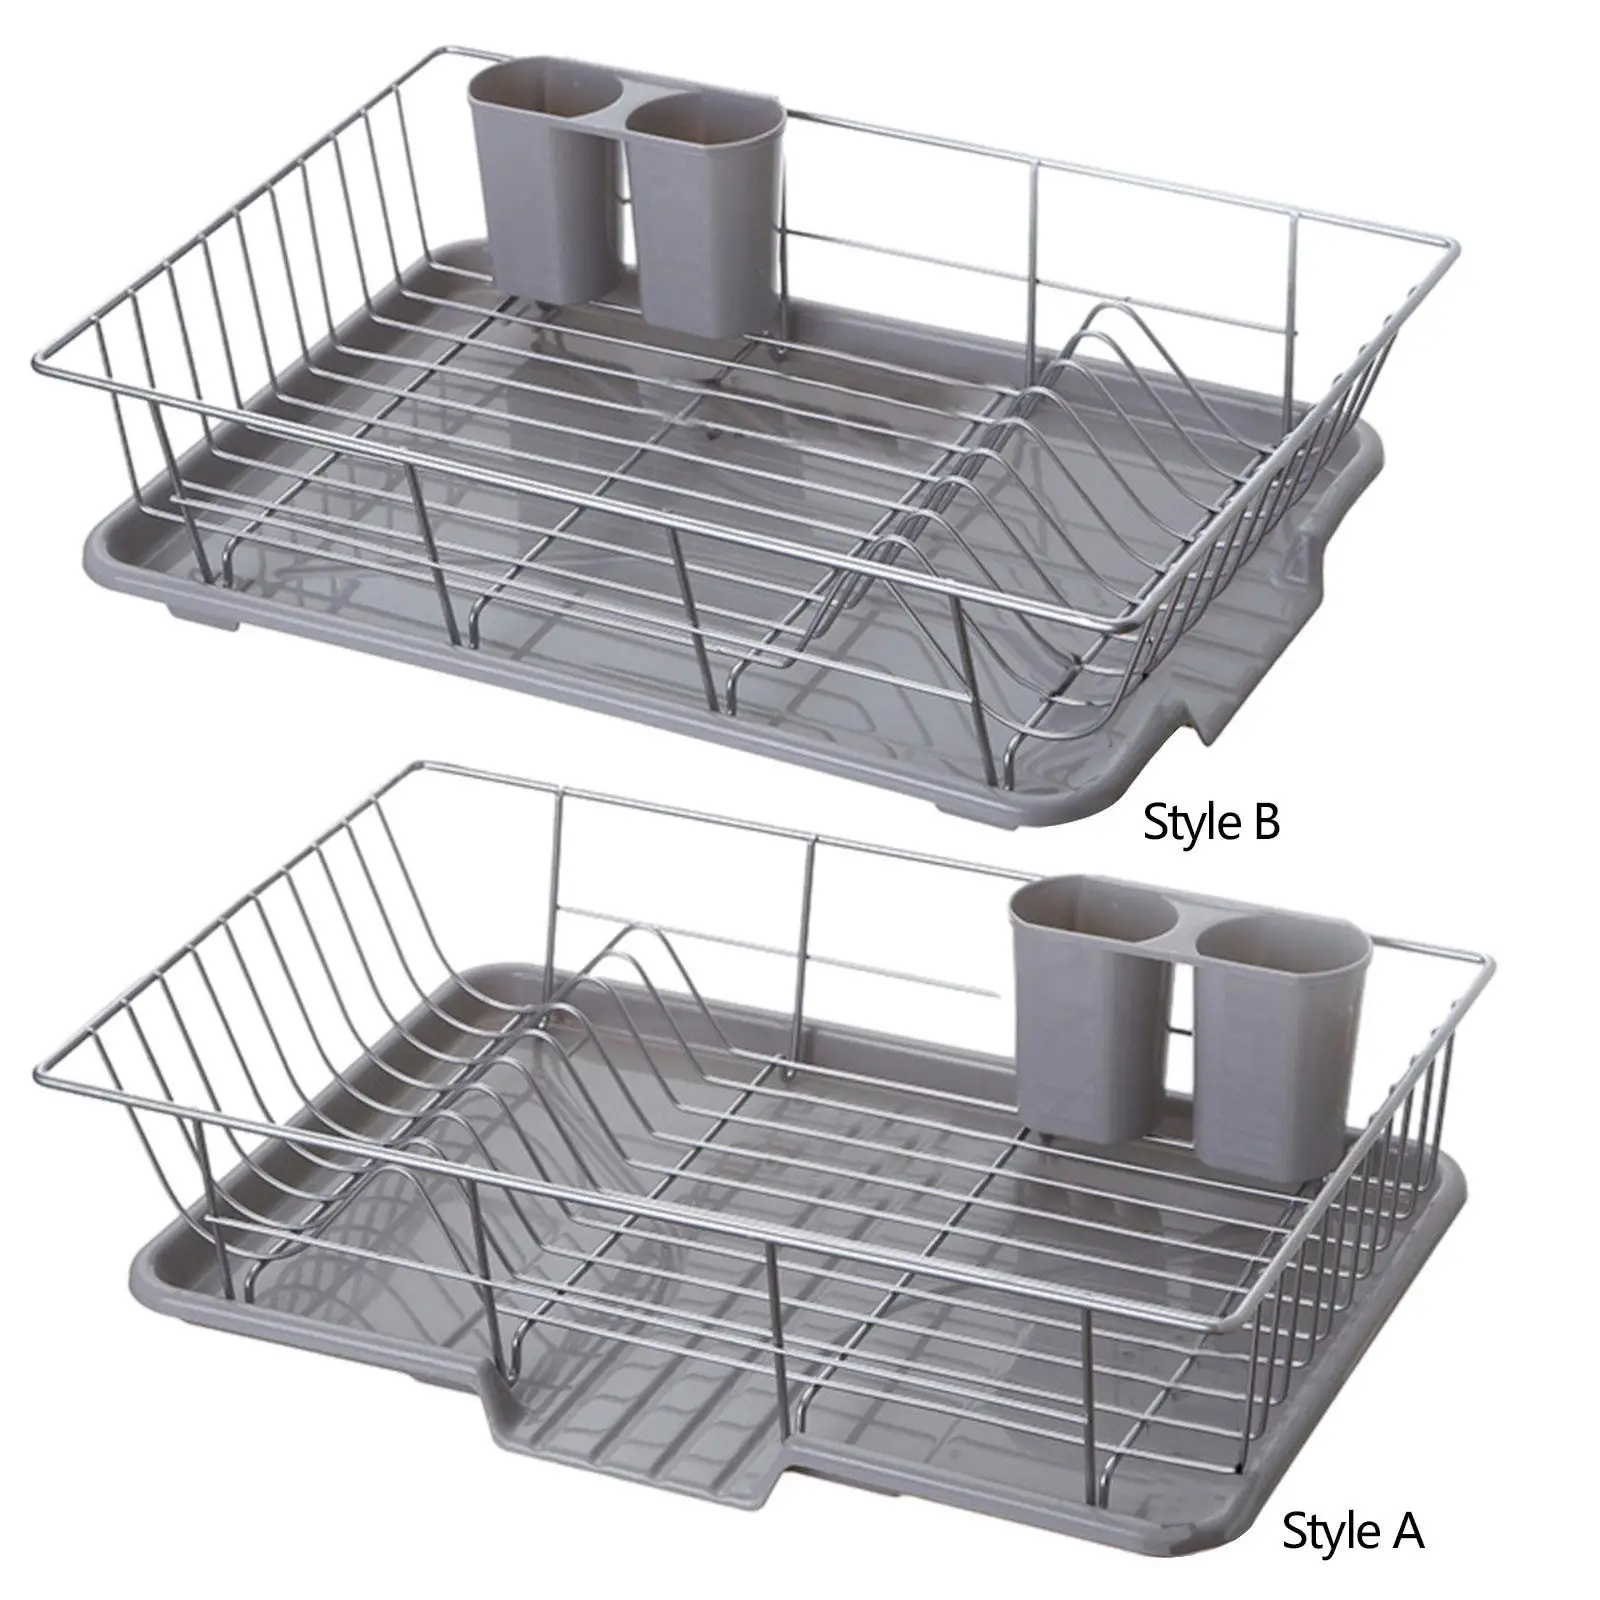 Kitchen Drying Rack Portable Dish Racks Self Draining Dish Dryer Counter Dish Drainer for Countertop Cups Bathroom Bowls Plates